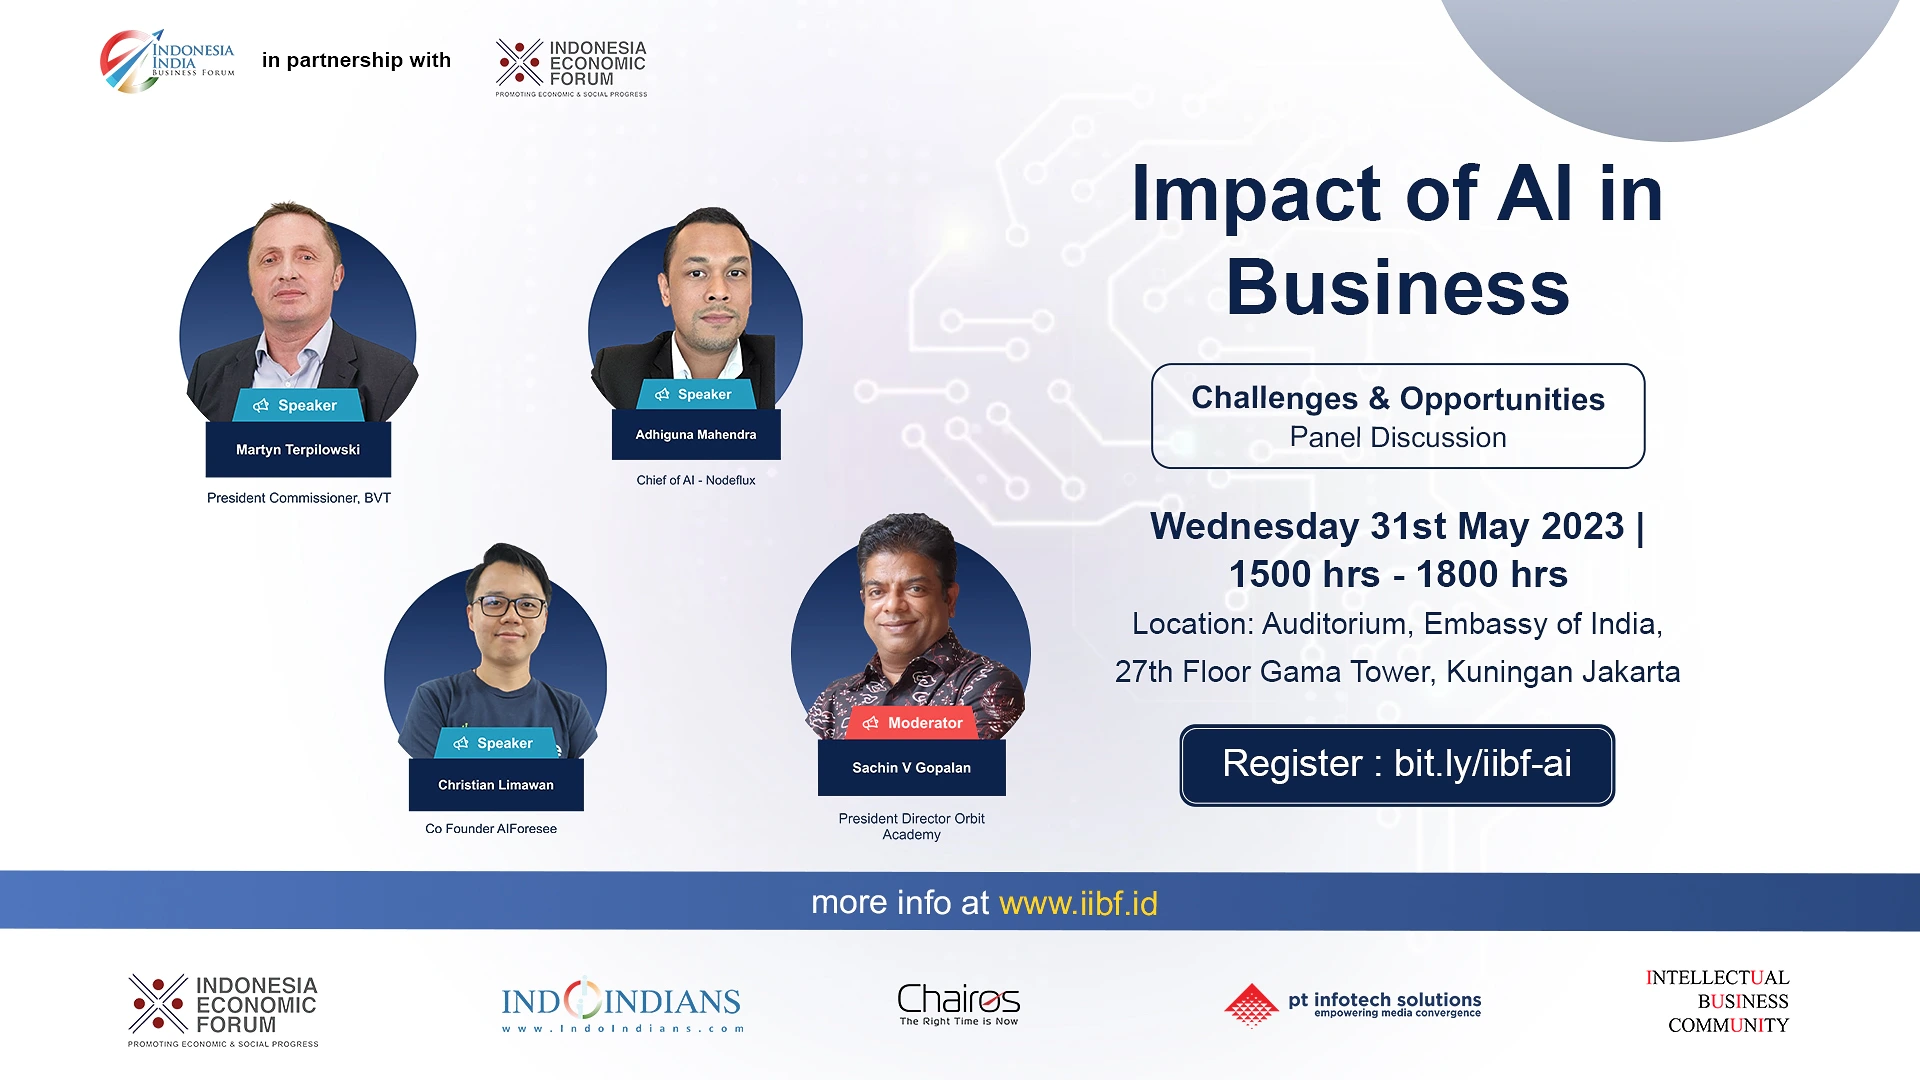 iibf-event-impact-of-ai-and-its-challenges-and-opportunities-may-2023